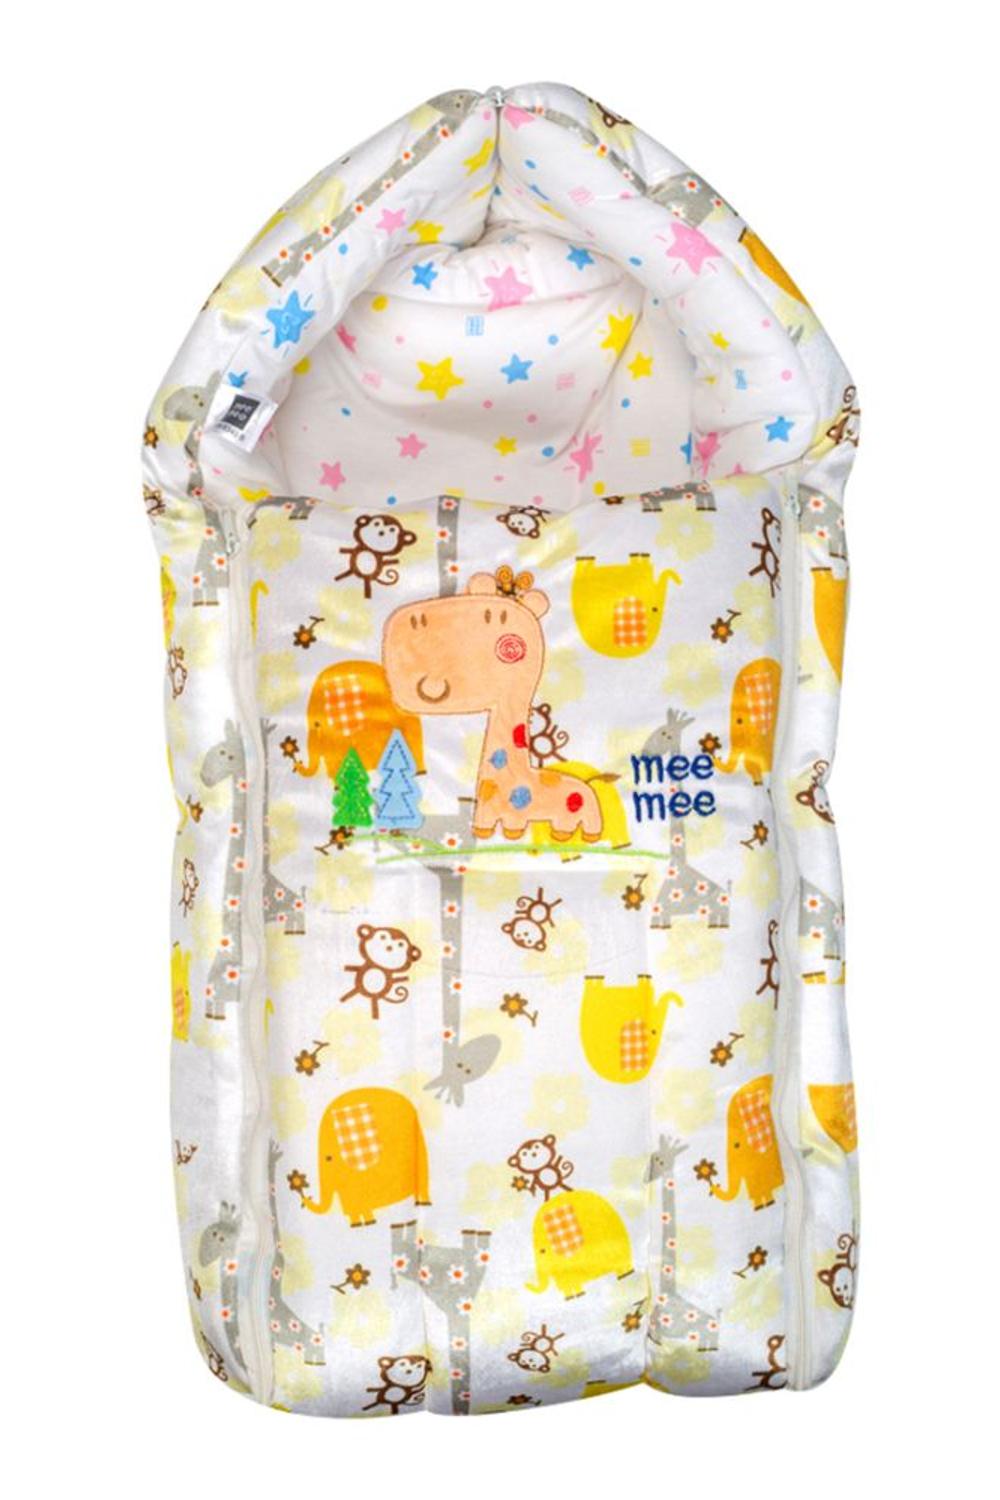 Mee Mee 3 in 1 Baby Carry Nest Sleeping Bag and Mattress (Yellow)